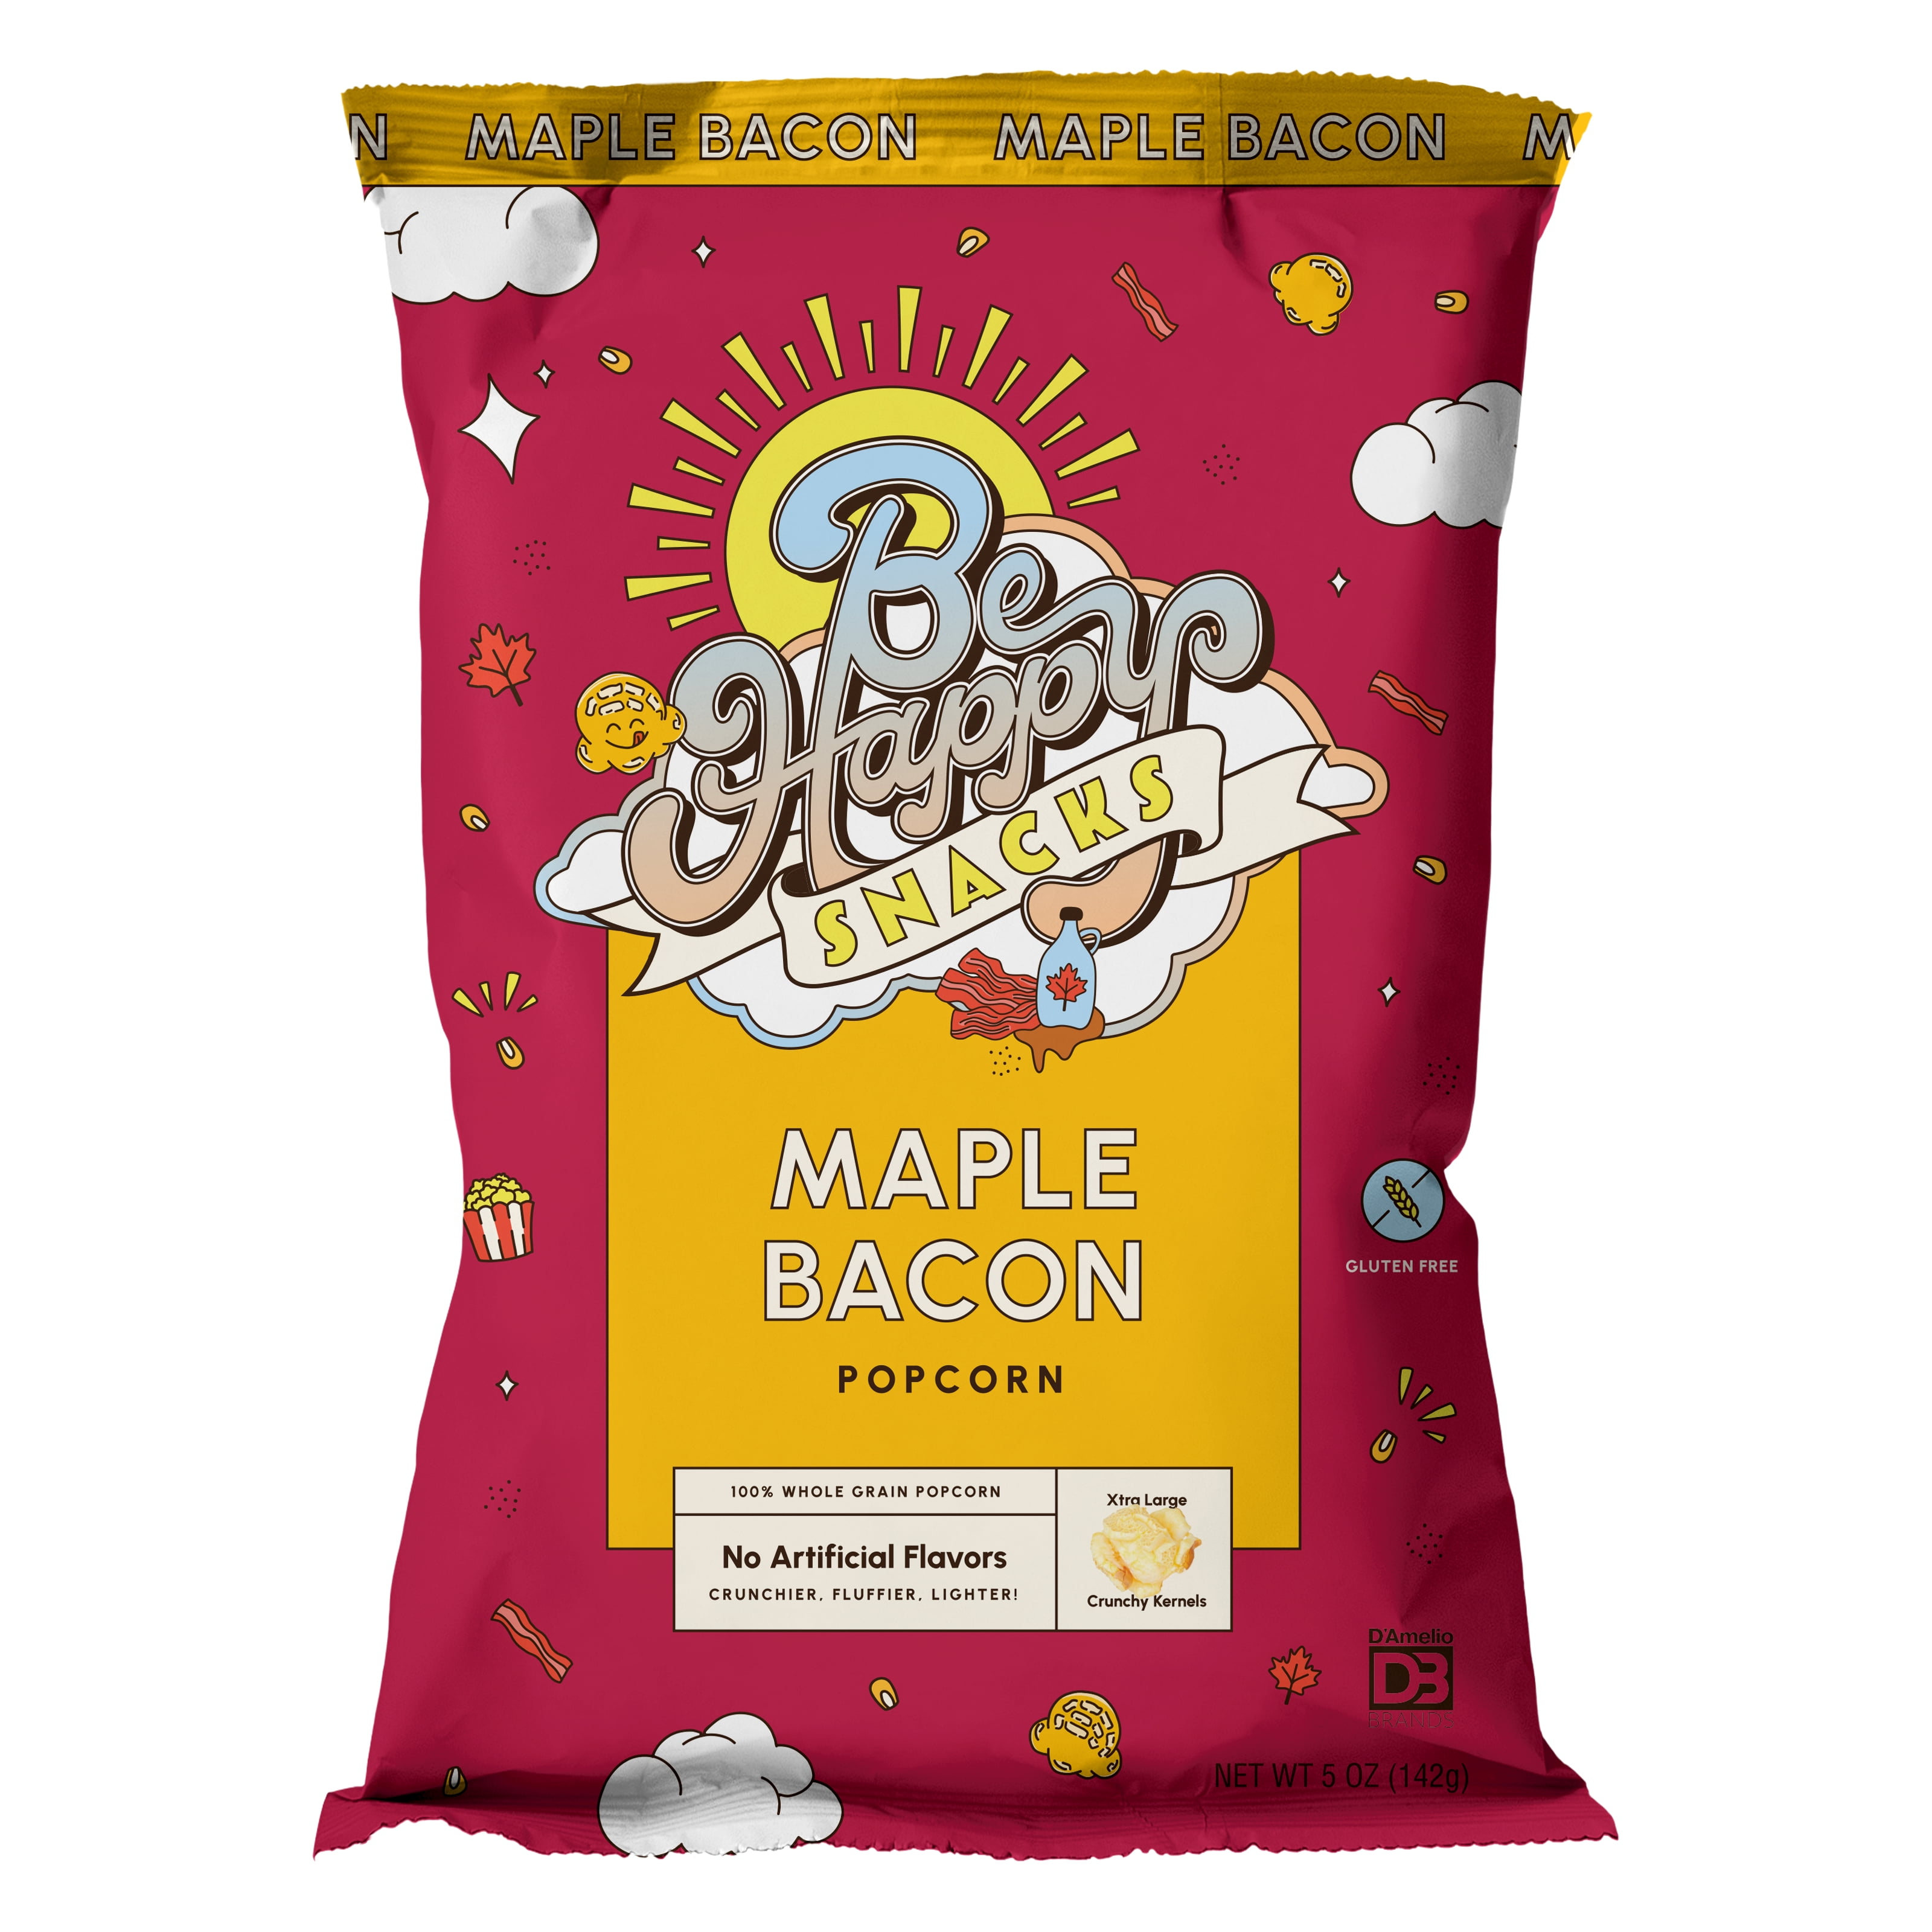 JIFFY POP Butter Flavored Popcorn, Stovetop Popping Pan, 4.5 oz. 